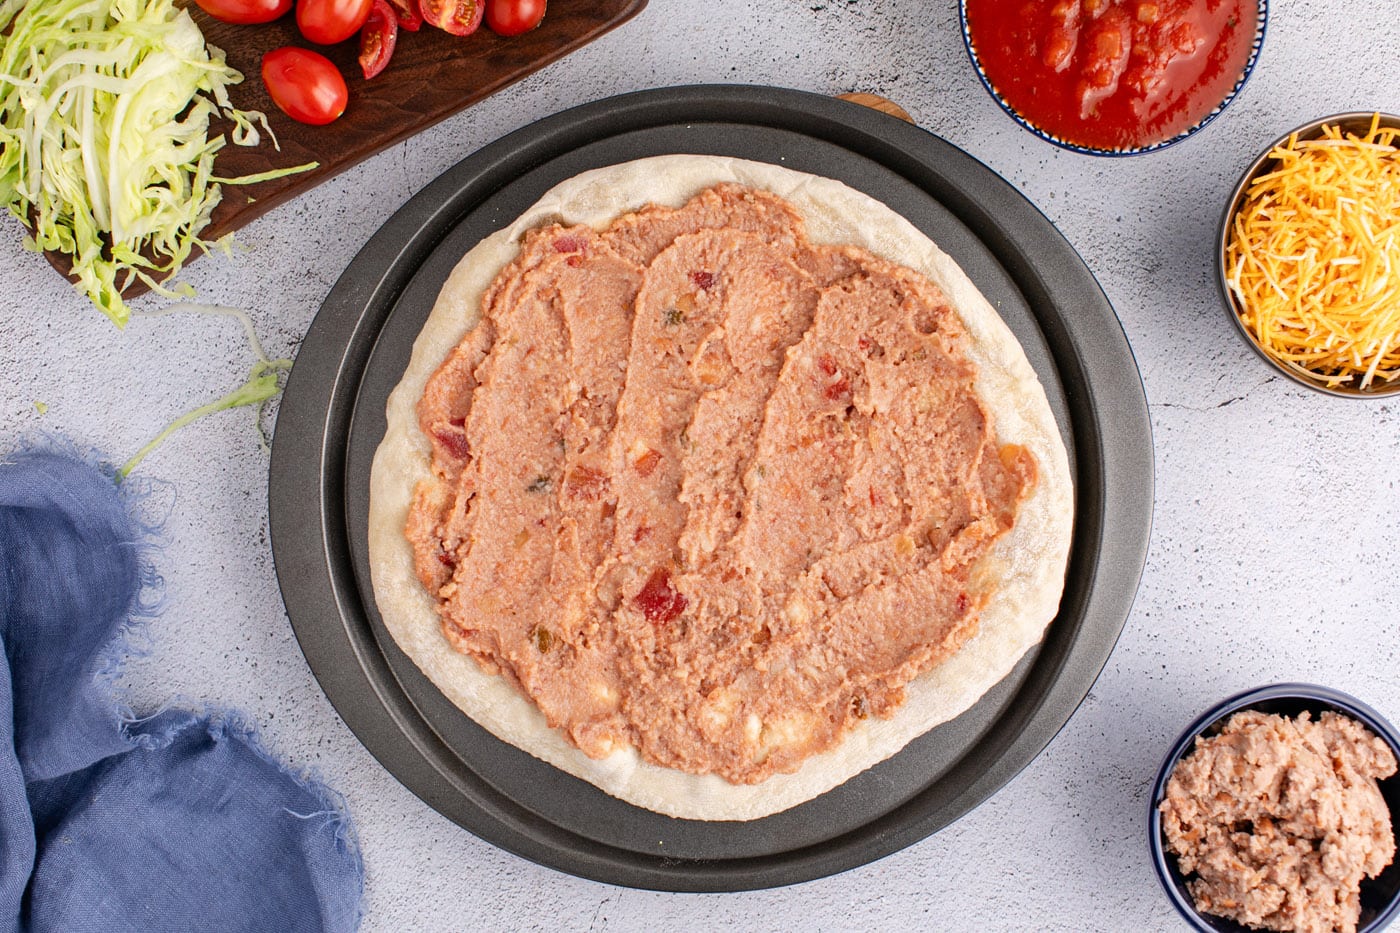 layer of refried beans and salsa over pizza crust